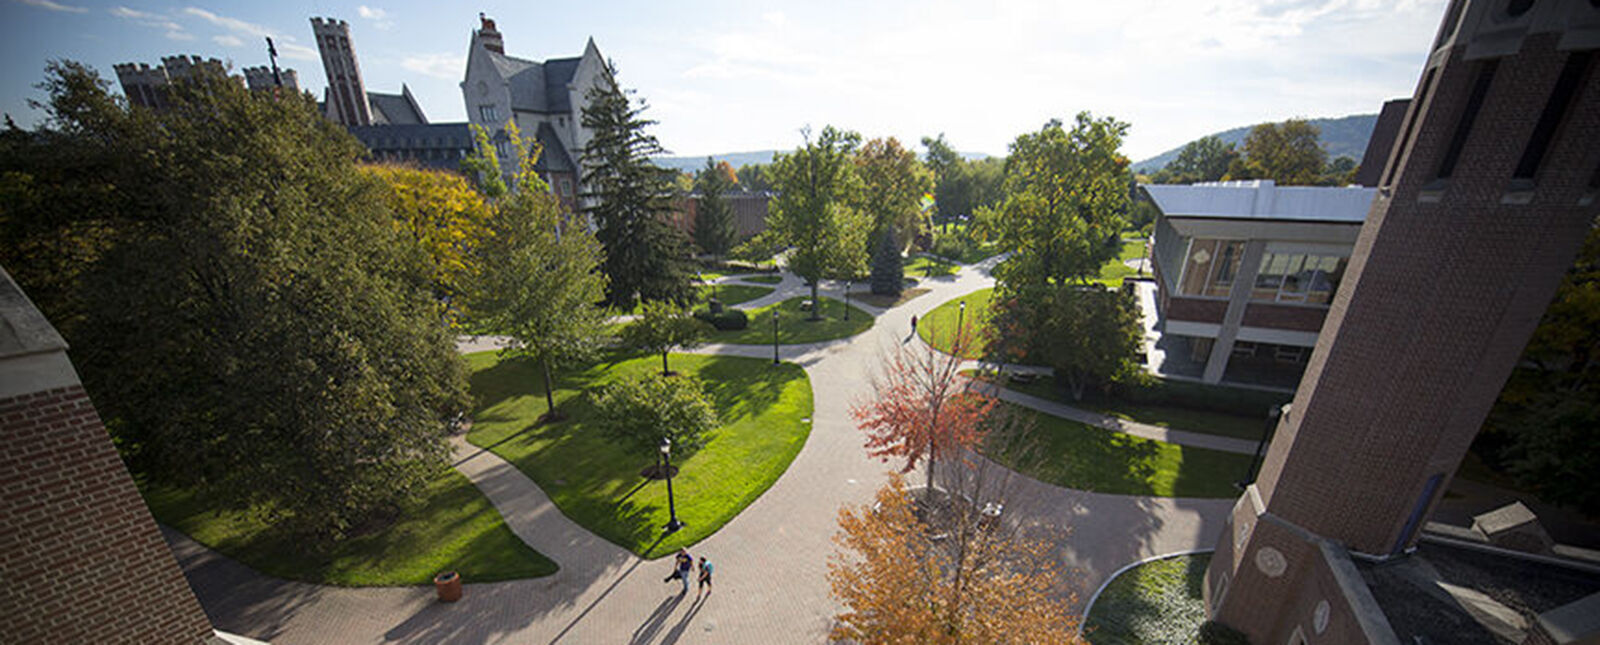 An overview of the Elmira College campus as students walk along a brick walkway